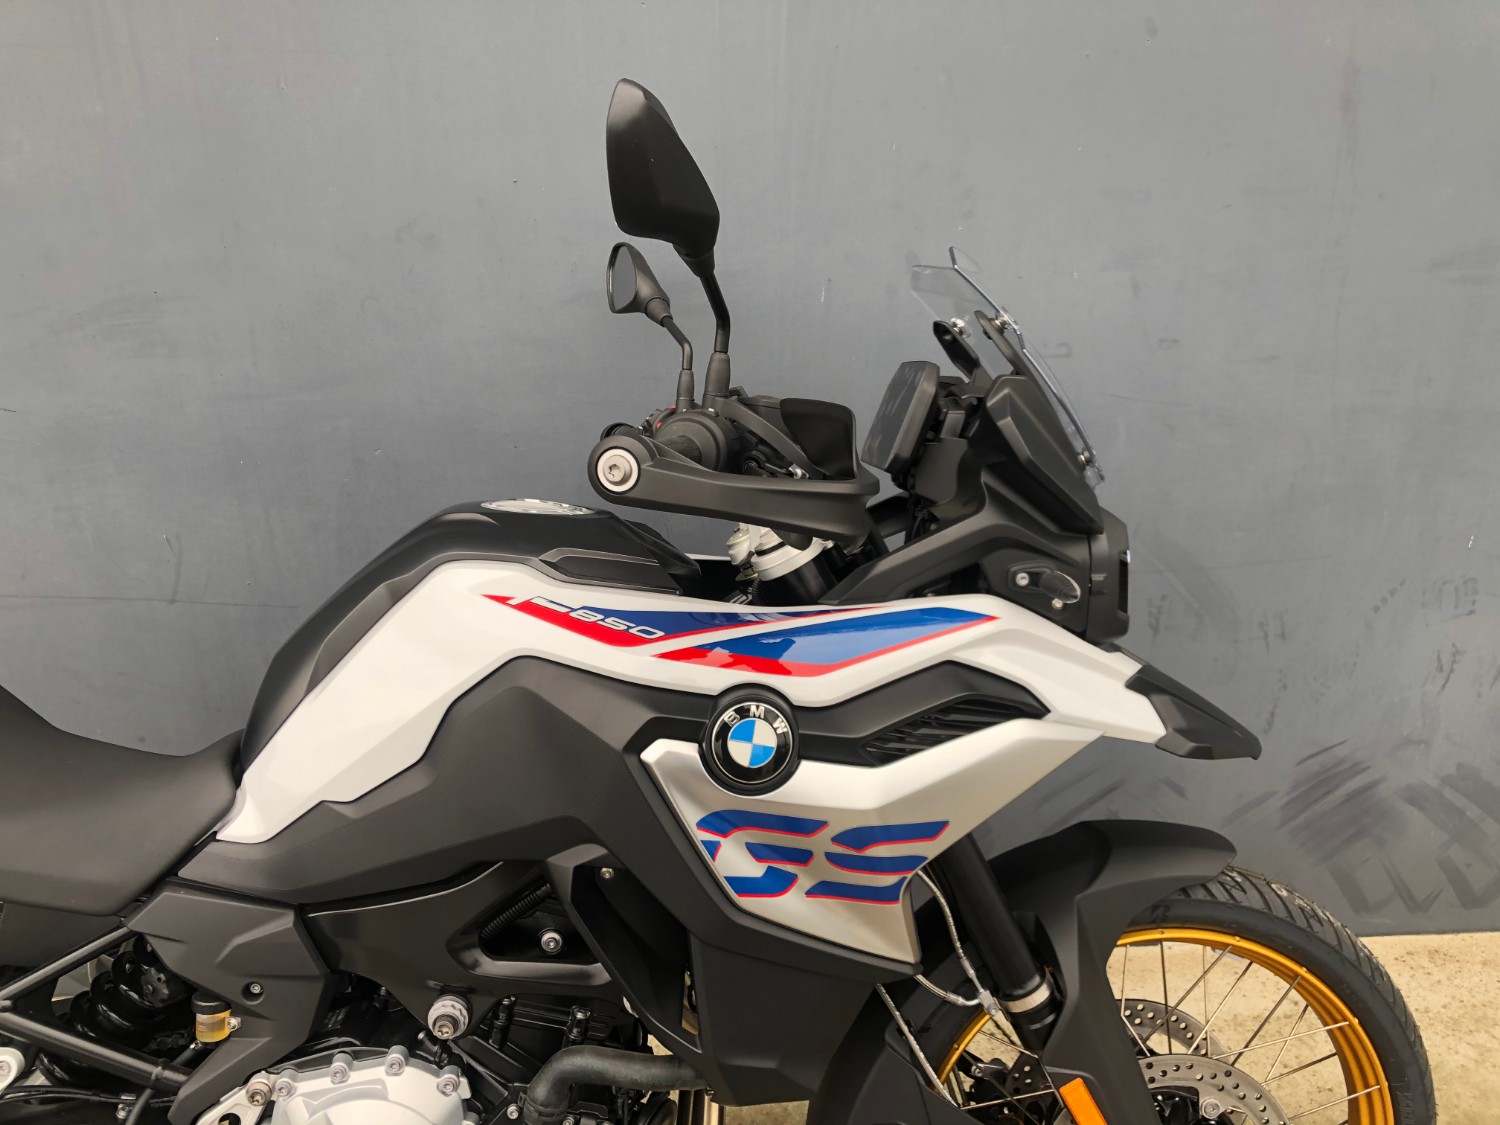 2019 BMW F850GS RallyE Low Suspension Motorcycle Image 23